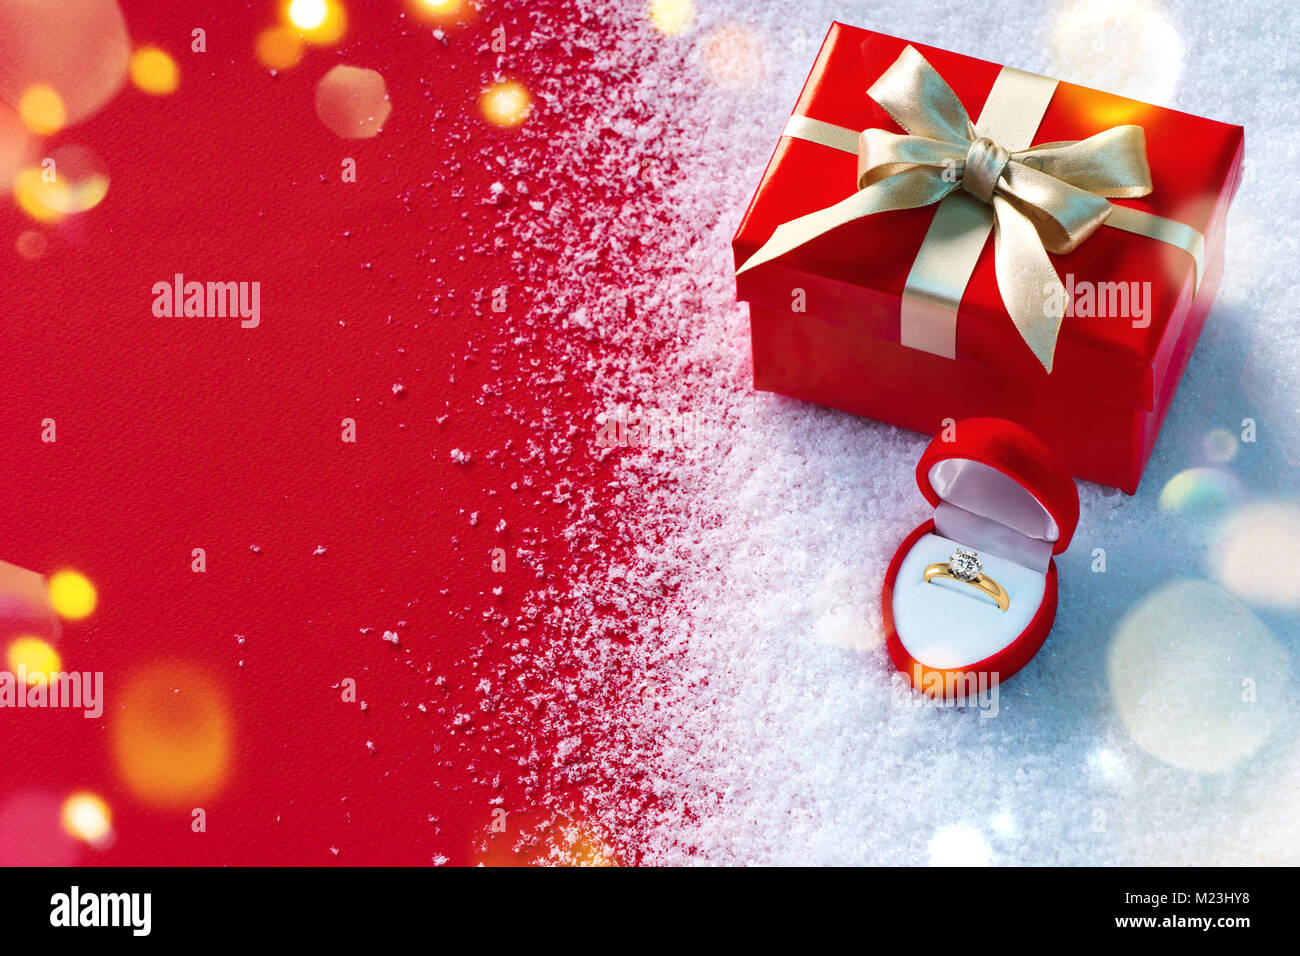 Valentine gift and jewellery box on snow and red background. St. Valentines Day concept Stock Photo